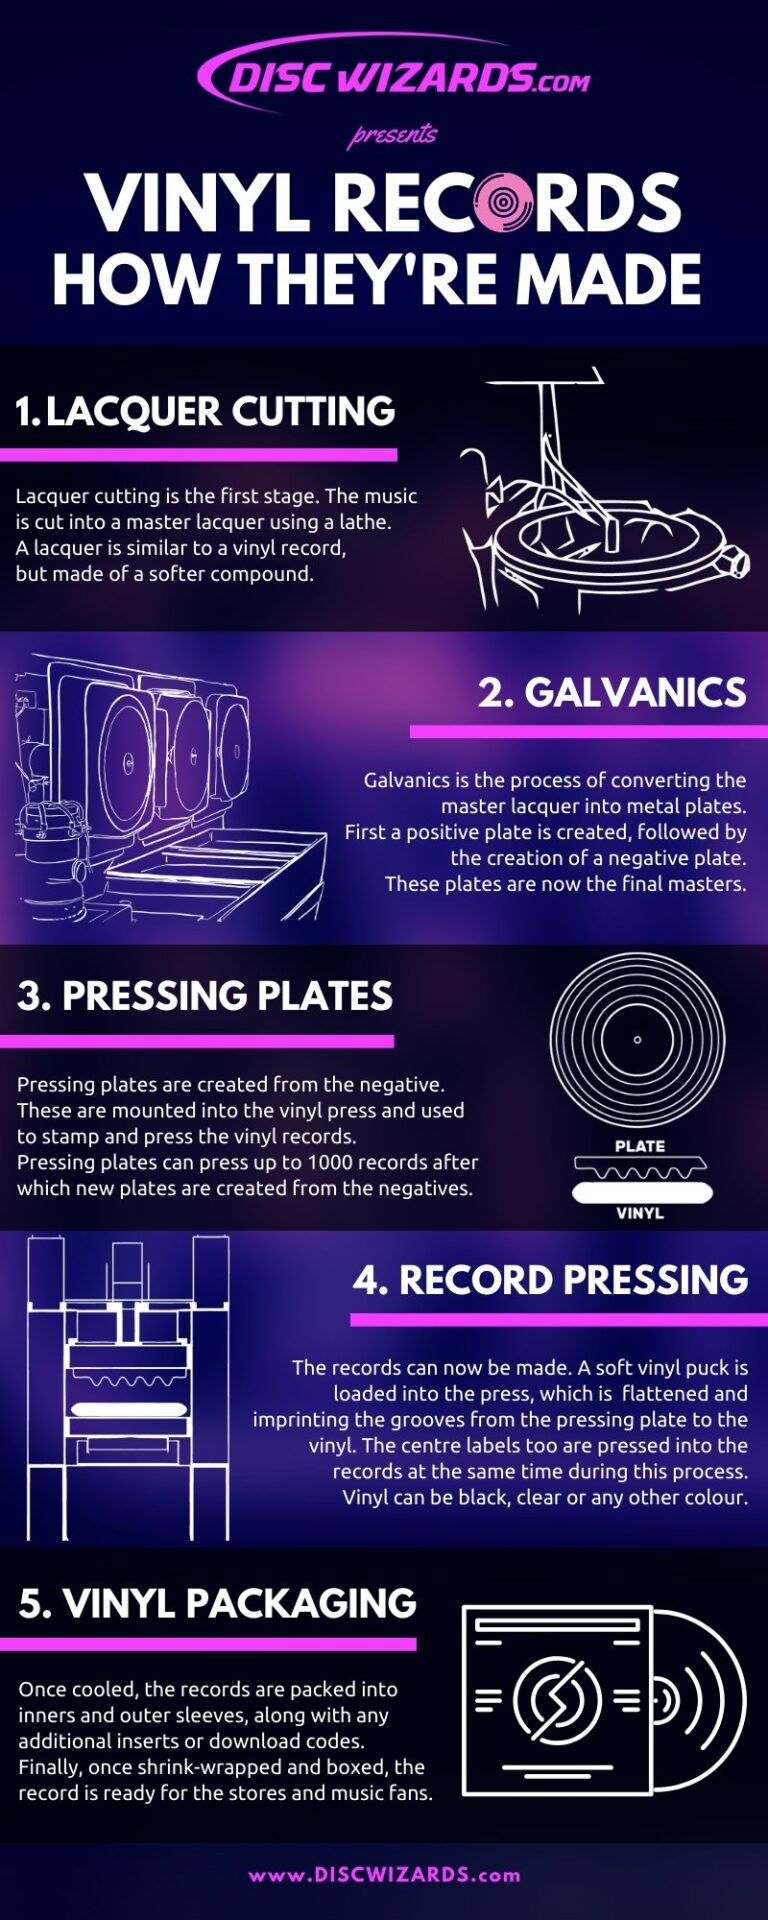 Vinyl pressing manufacture process and stages infographic | Disc Wizards